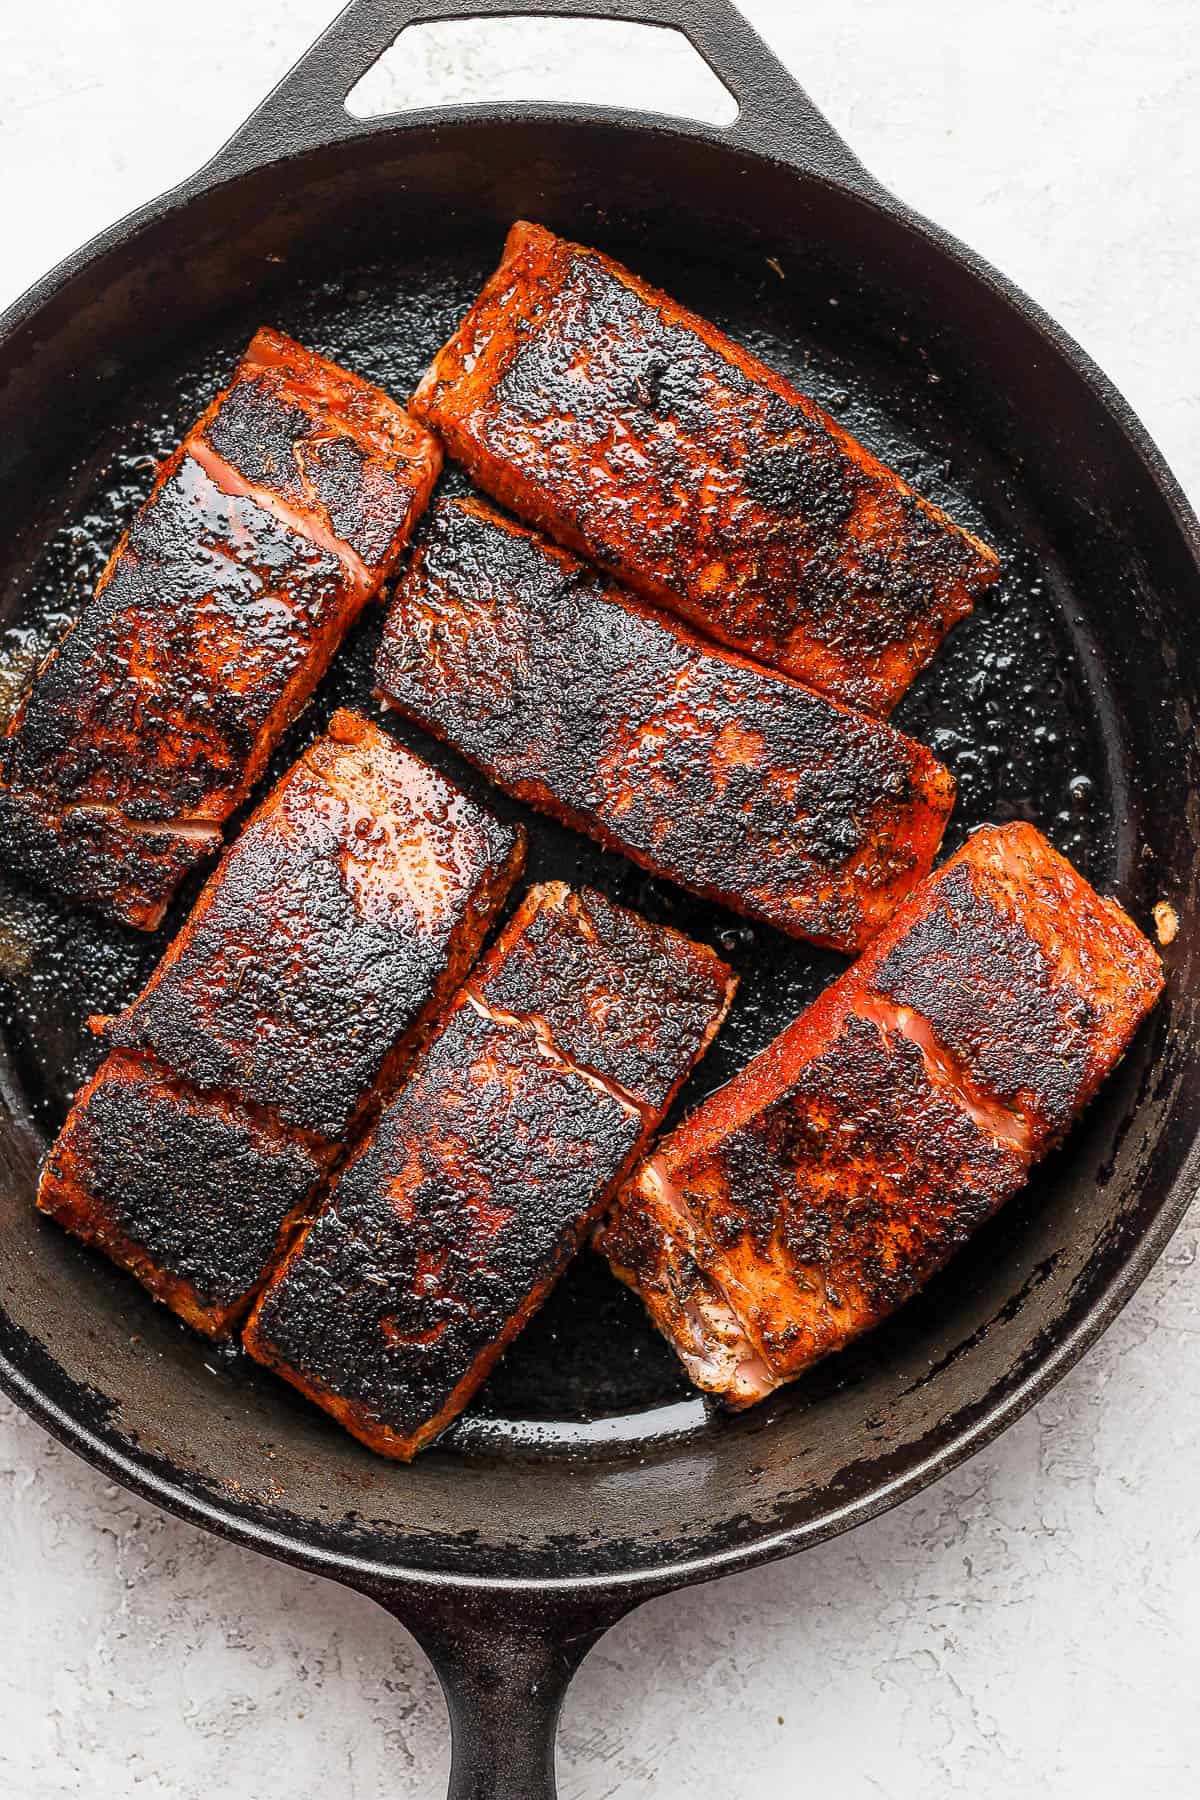 Blackened salmon after being seared in the cast iron skillet.